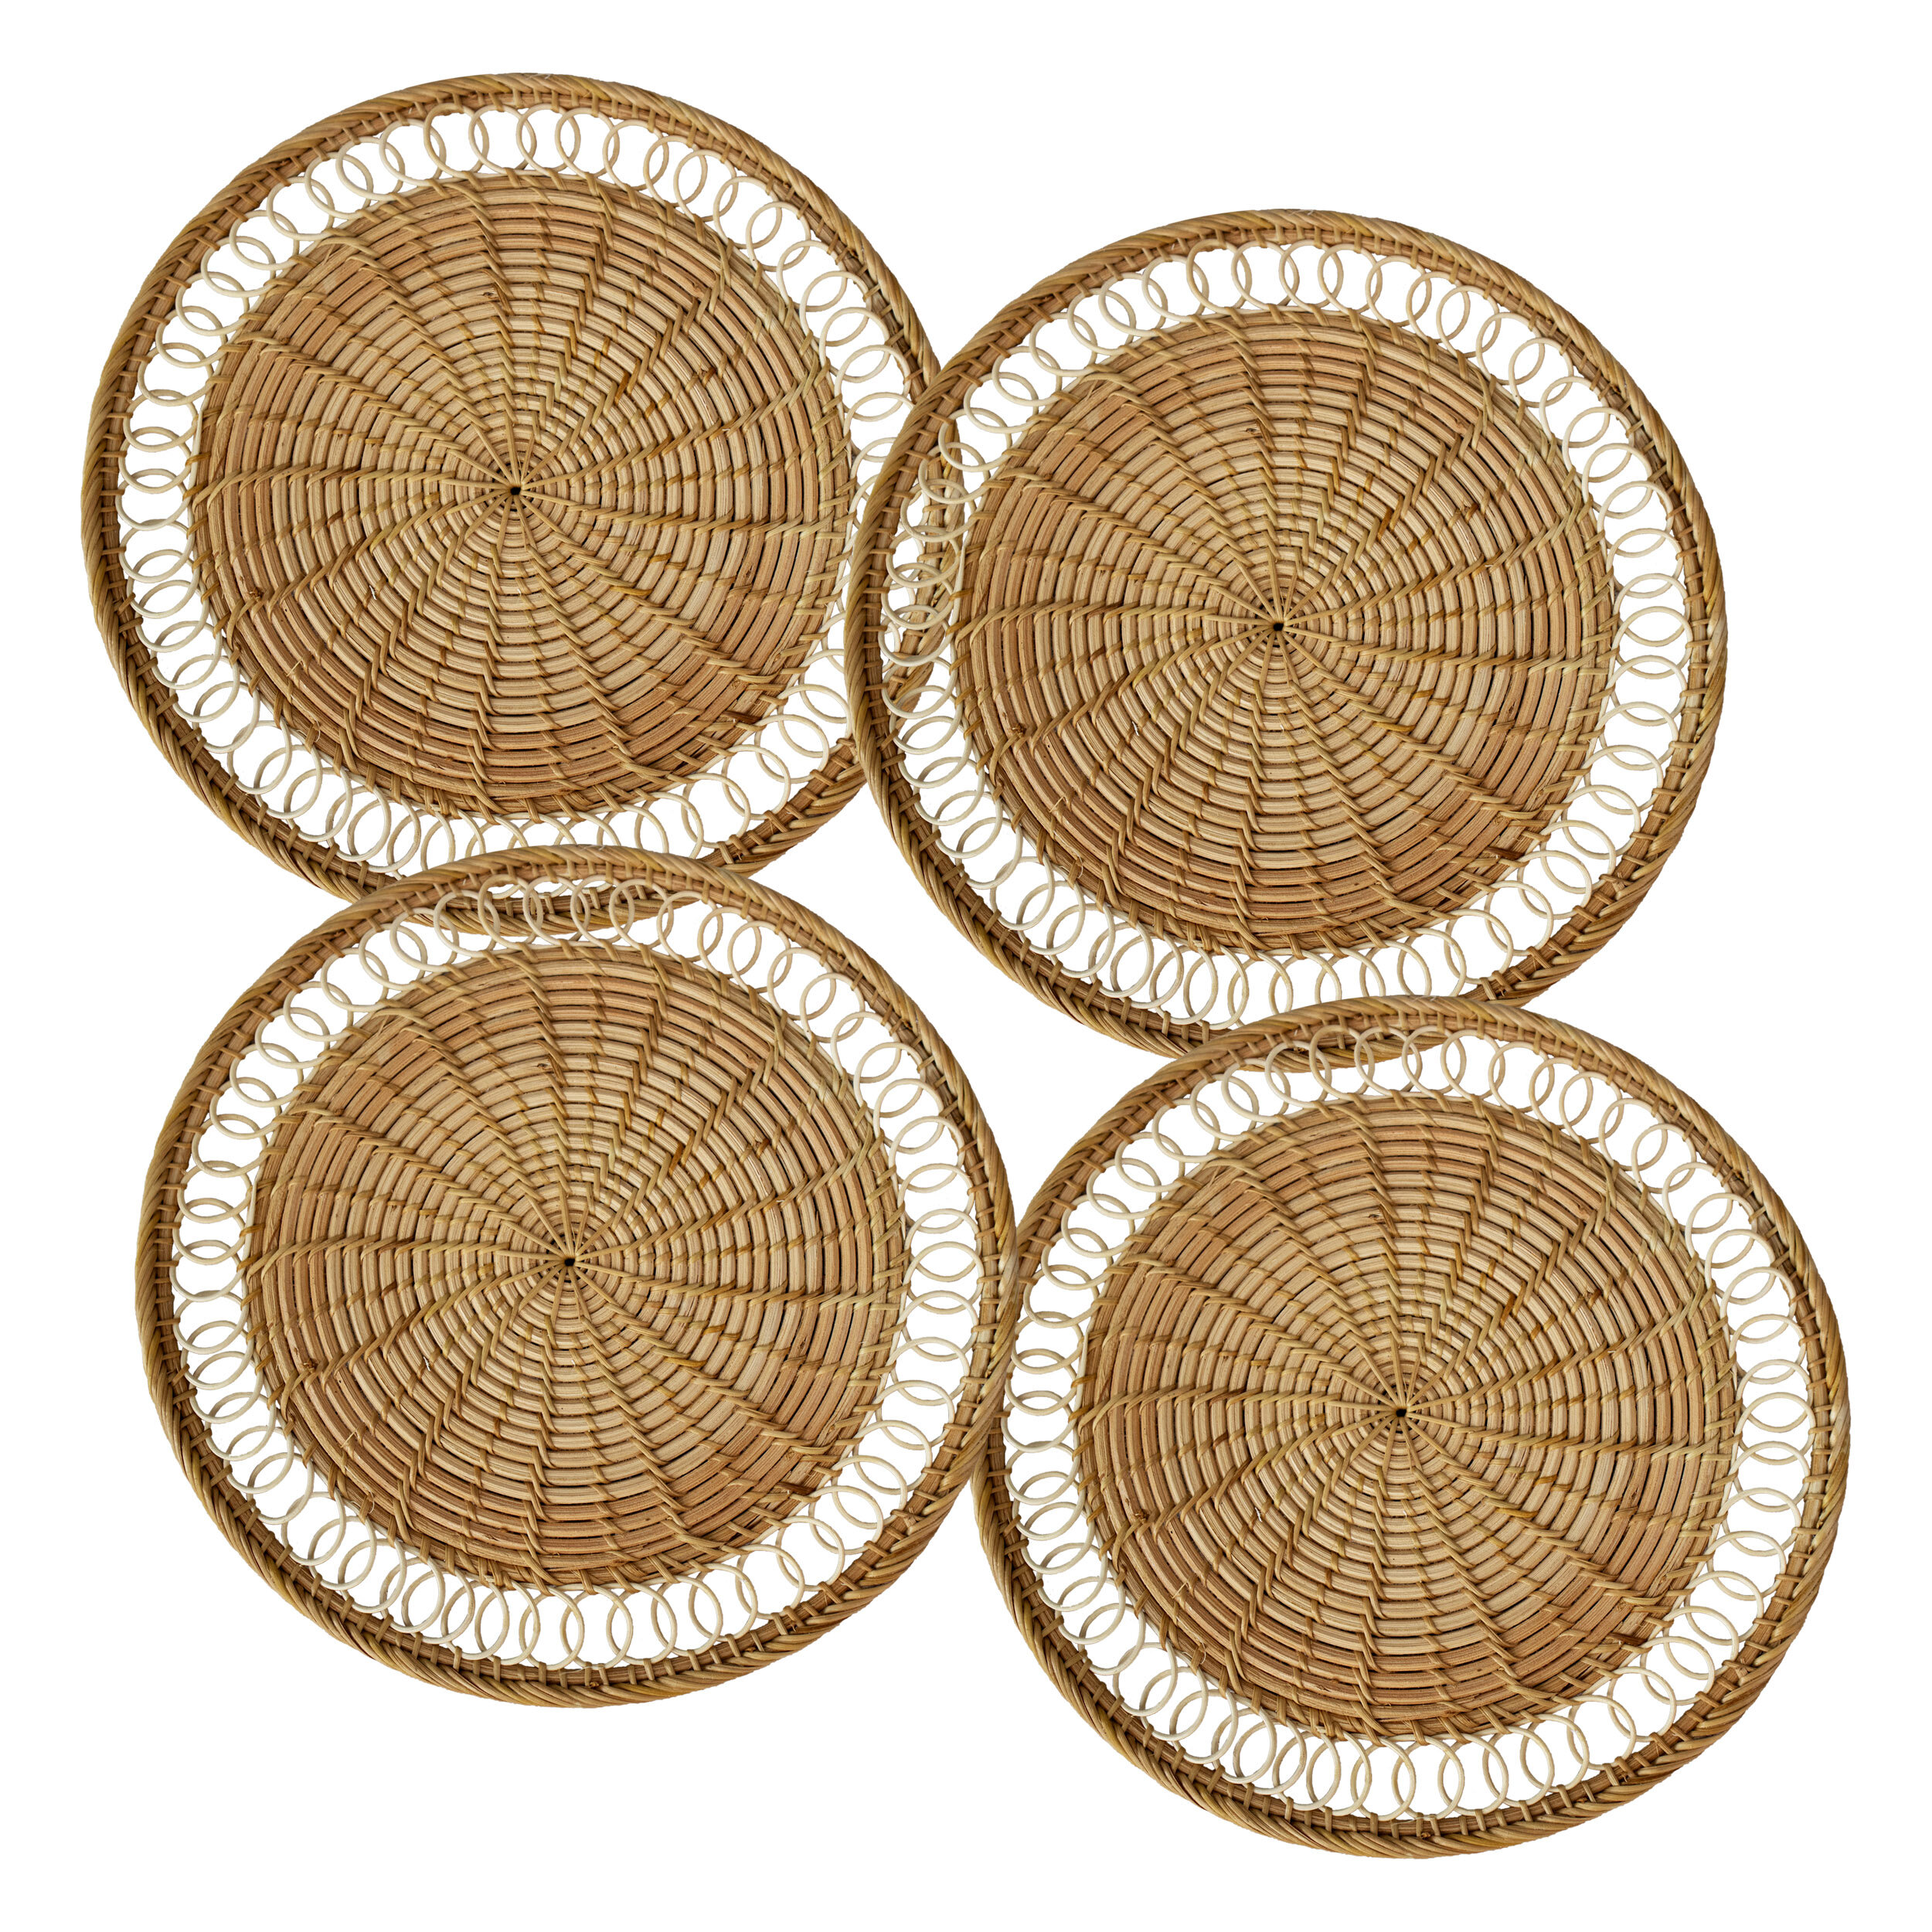 Wicker Rustic Placemats for Dining Table Round Rattan Place MATS Set of 6 